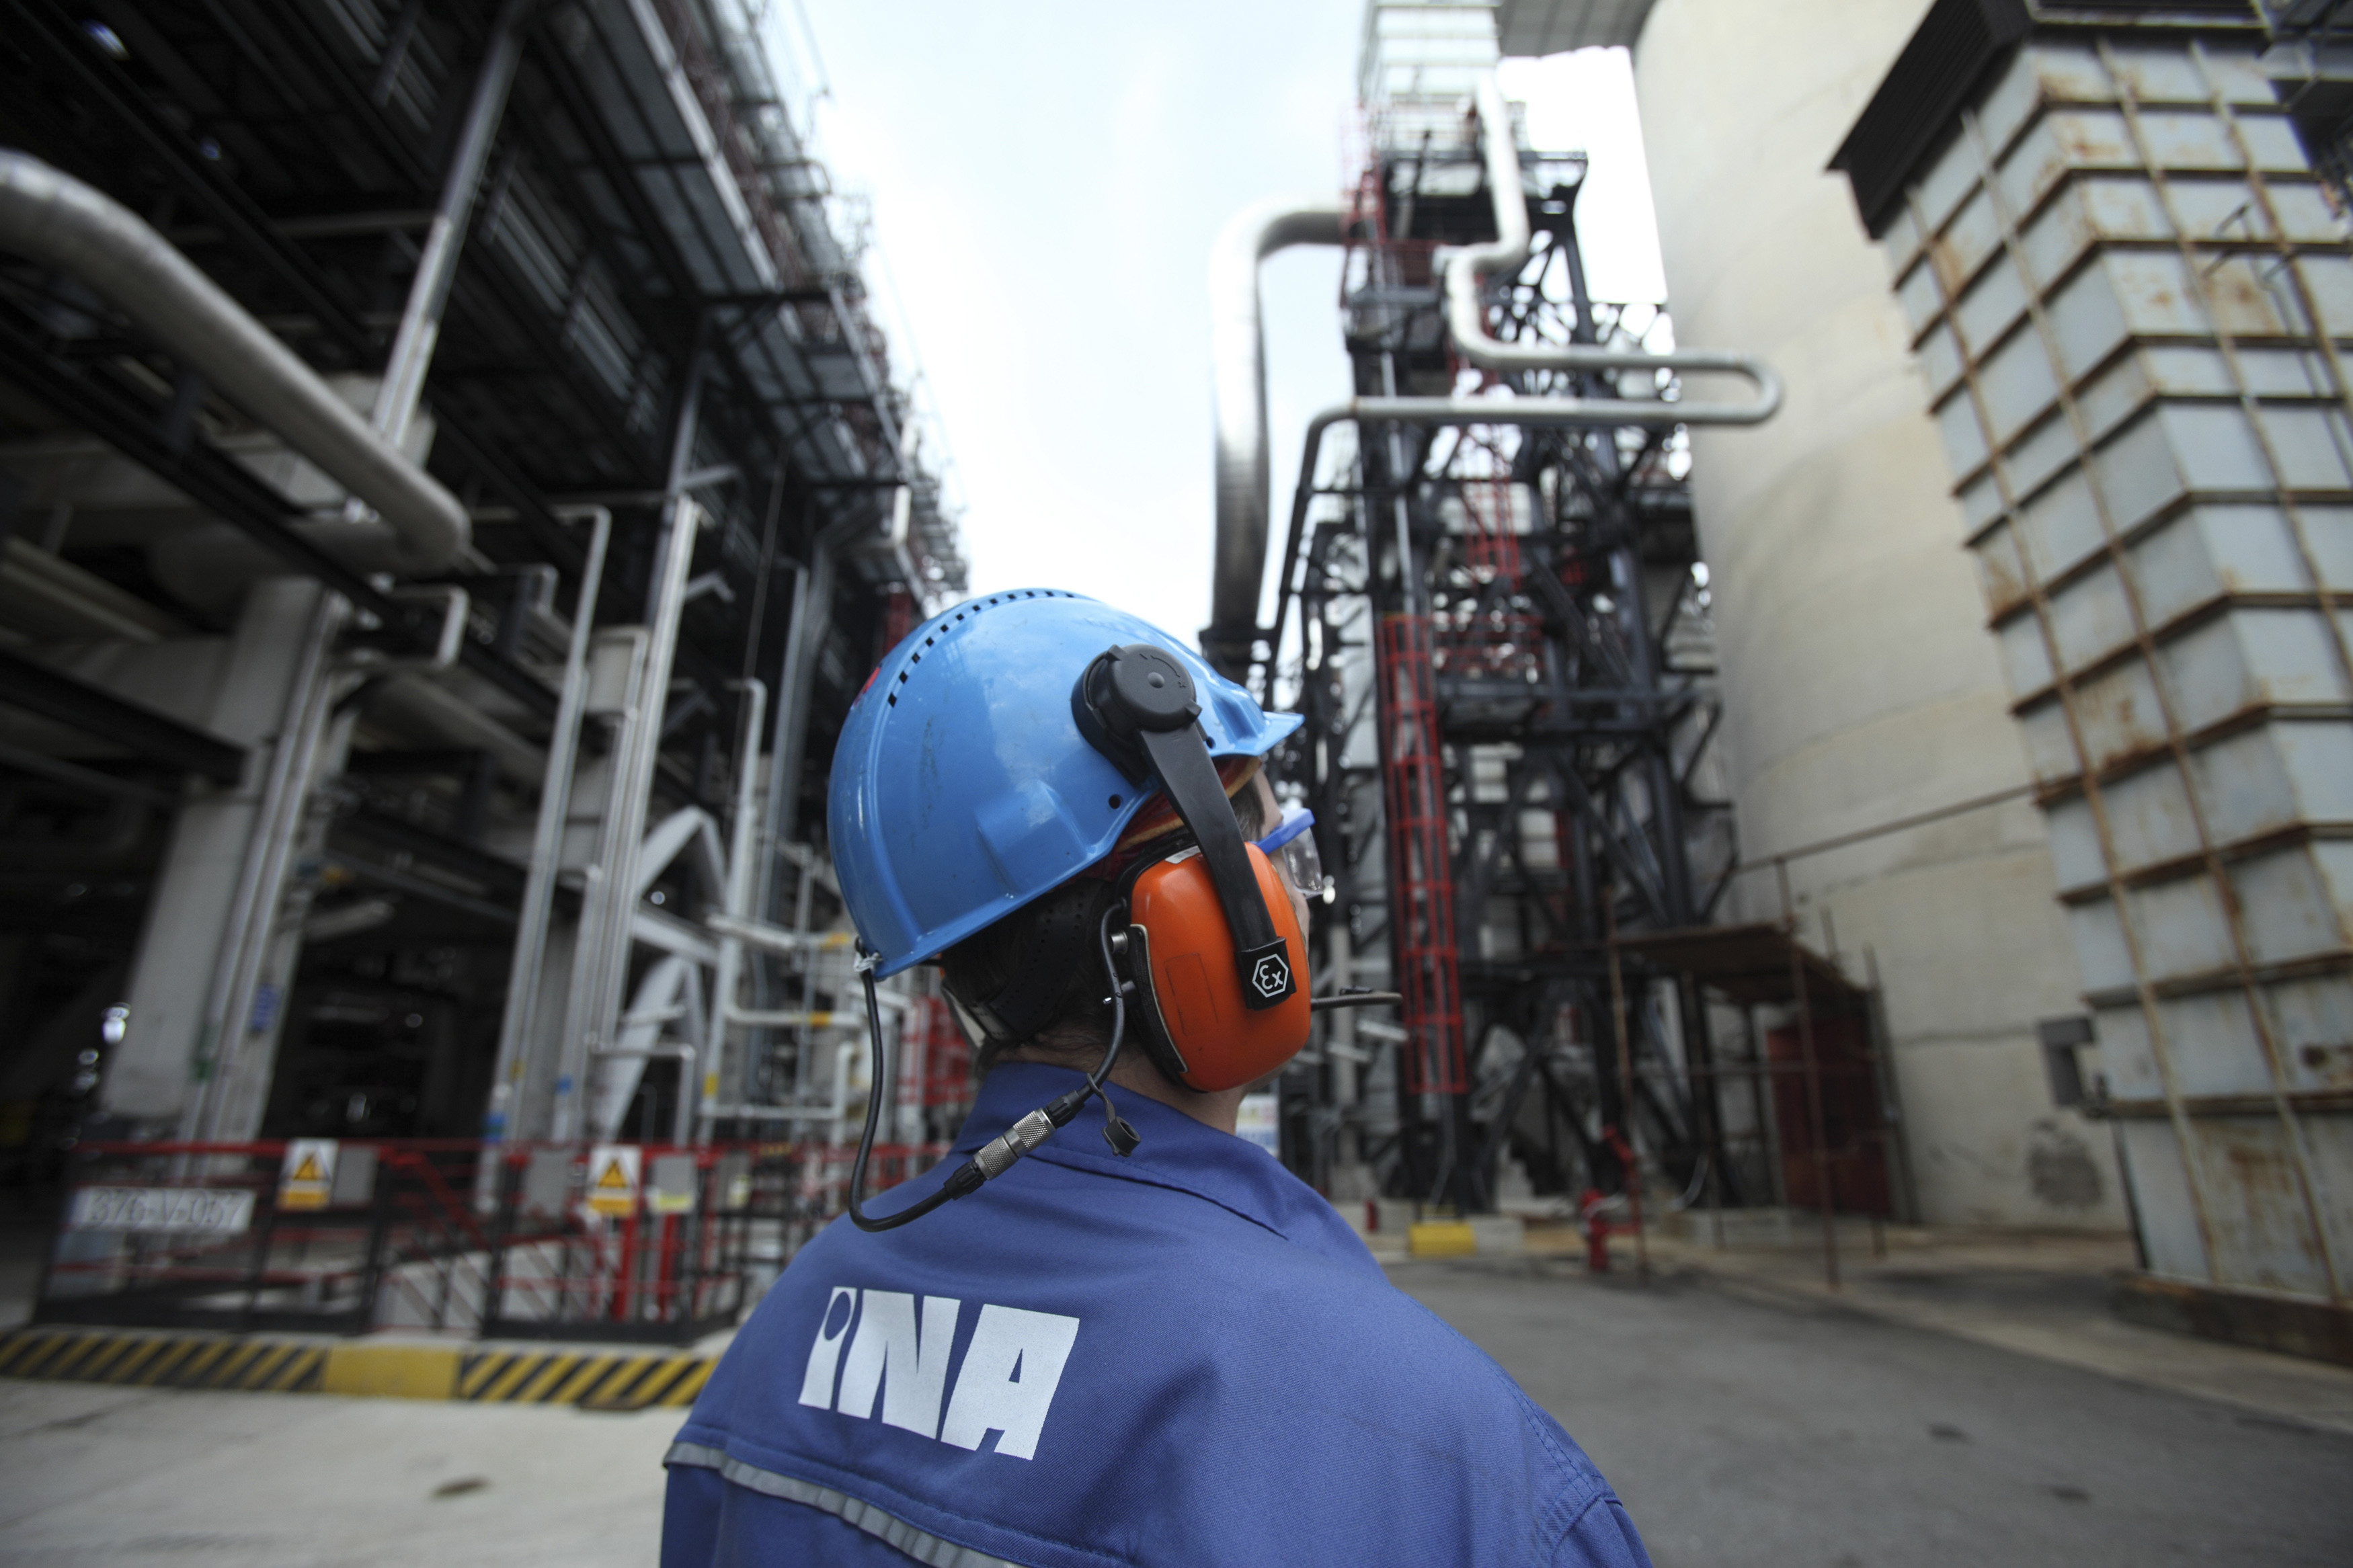 A worker looks on at plant in INA's oil refinery in Rijeka